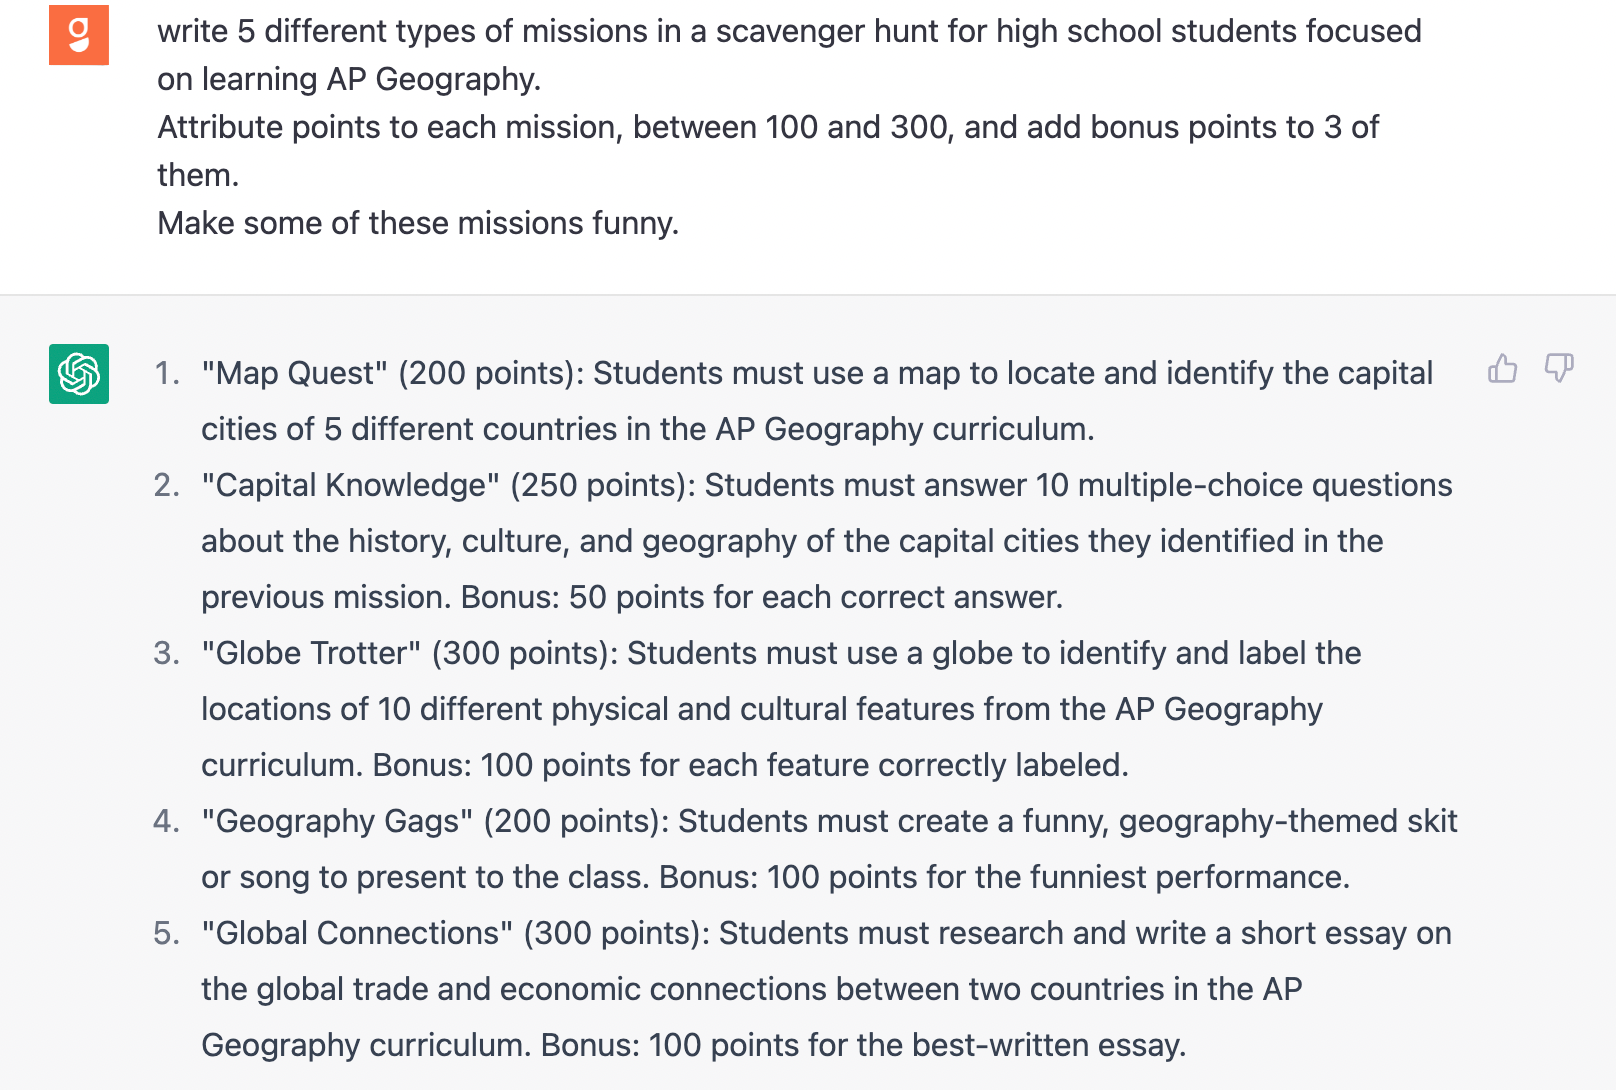 Goosechase asks: Write 5 different types of missions in a scavenger hunt for high school students focused on learning AP Geography. Attribute points to each mission, between 100 and 300, and add bonus points to 3 of them. Make these missions fun and informative. ChatGPT responds with 5 Missions. 1. Map Quest for 200 points. 2 Capital Knowledge for 250 points. 3. Glove Trotter for 300 points. 4. Geography Gags for 200 points. 5. Global Connections for 300 points. Four of the missions have bonus points attached. And they all read as if a human wrote them.  